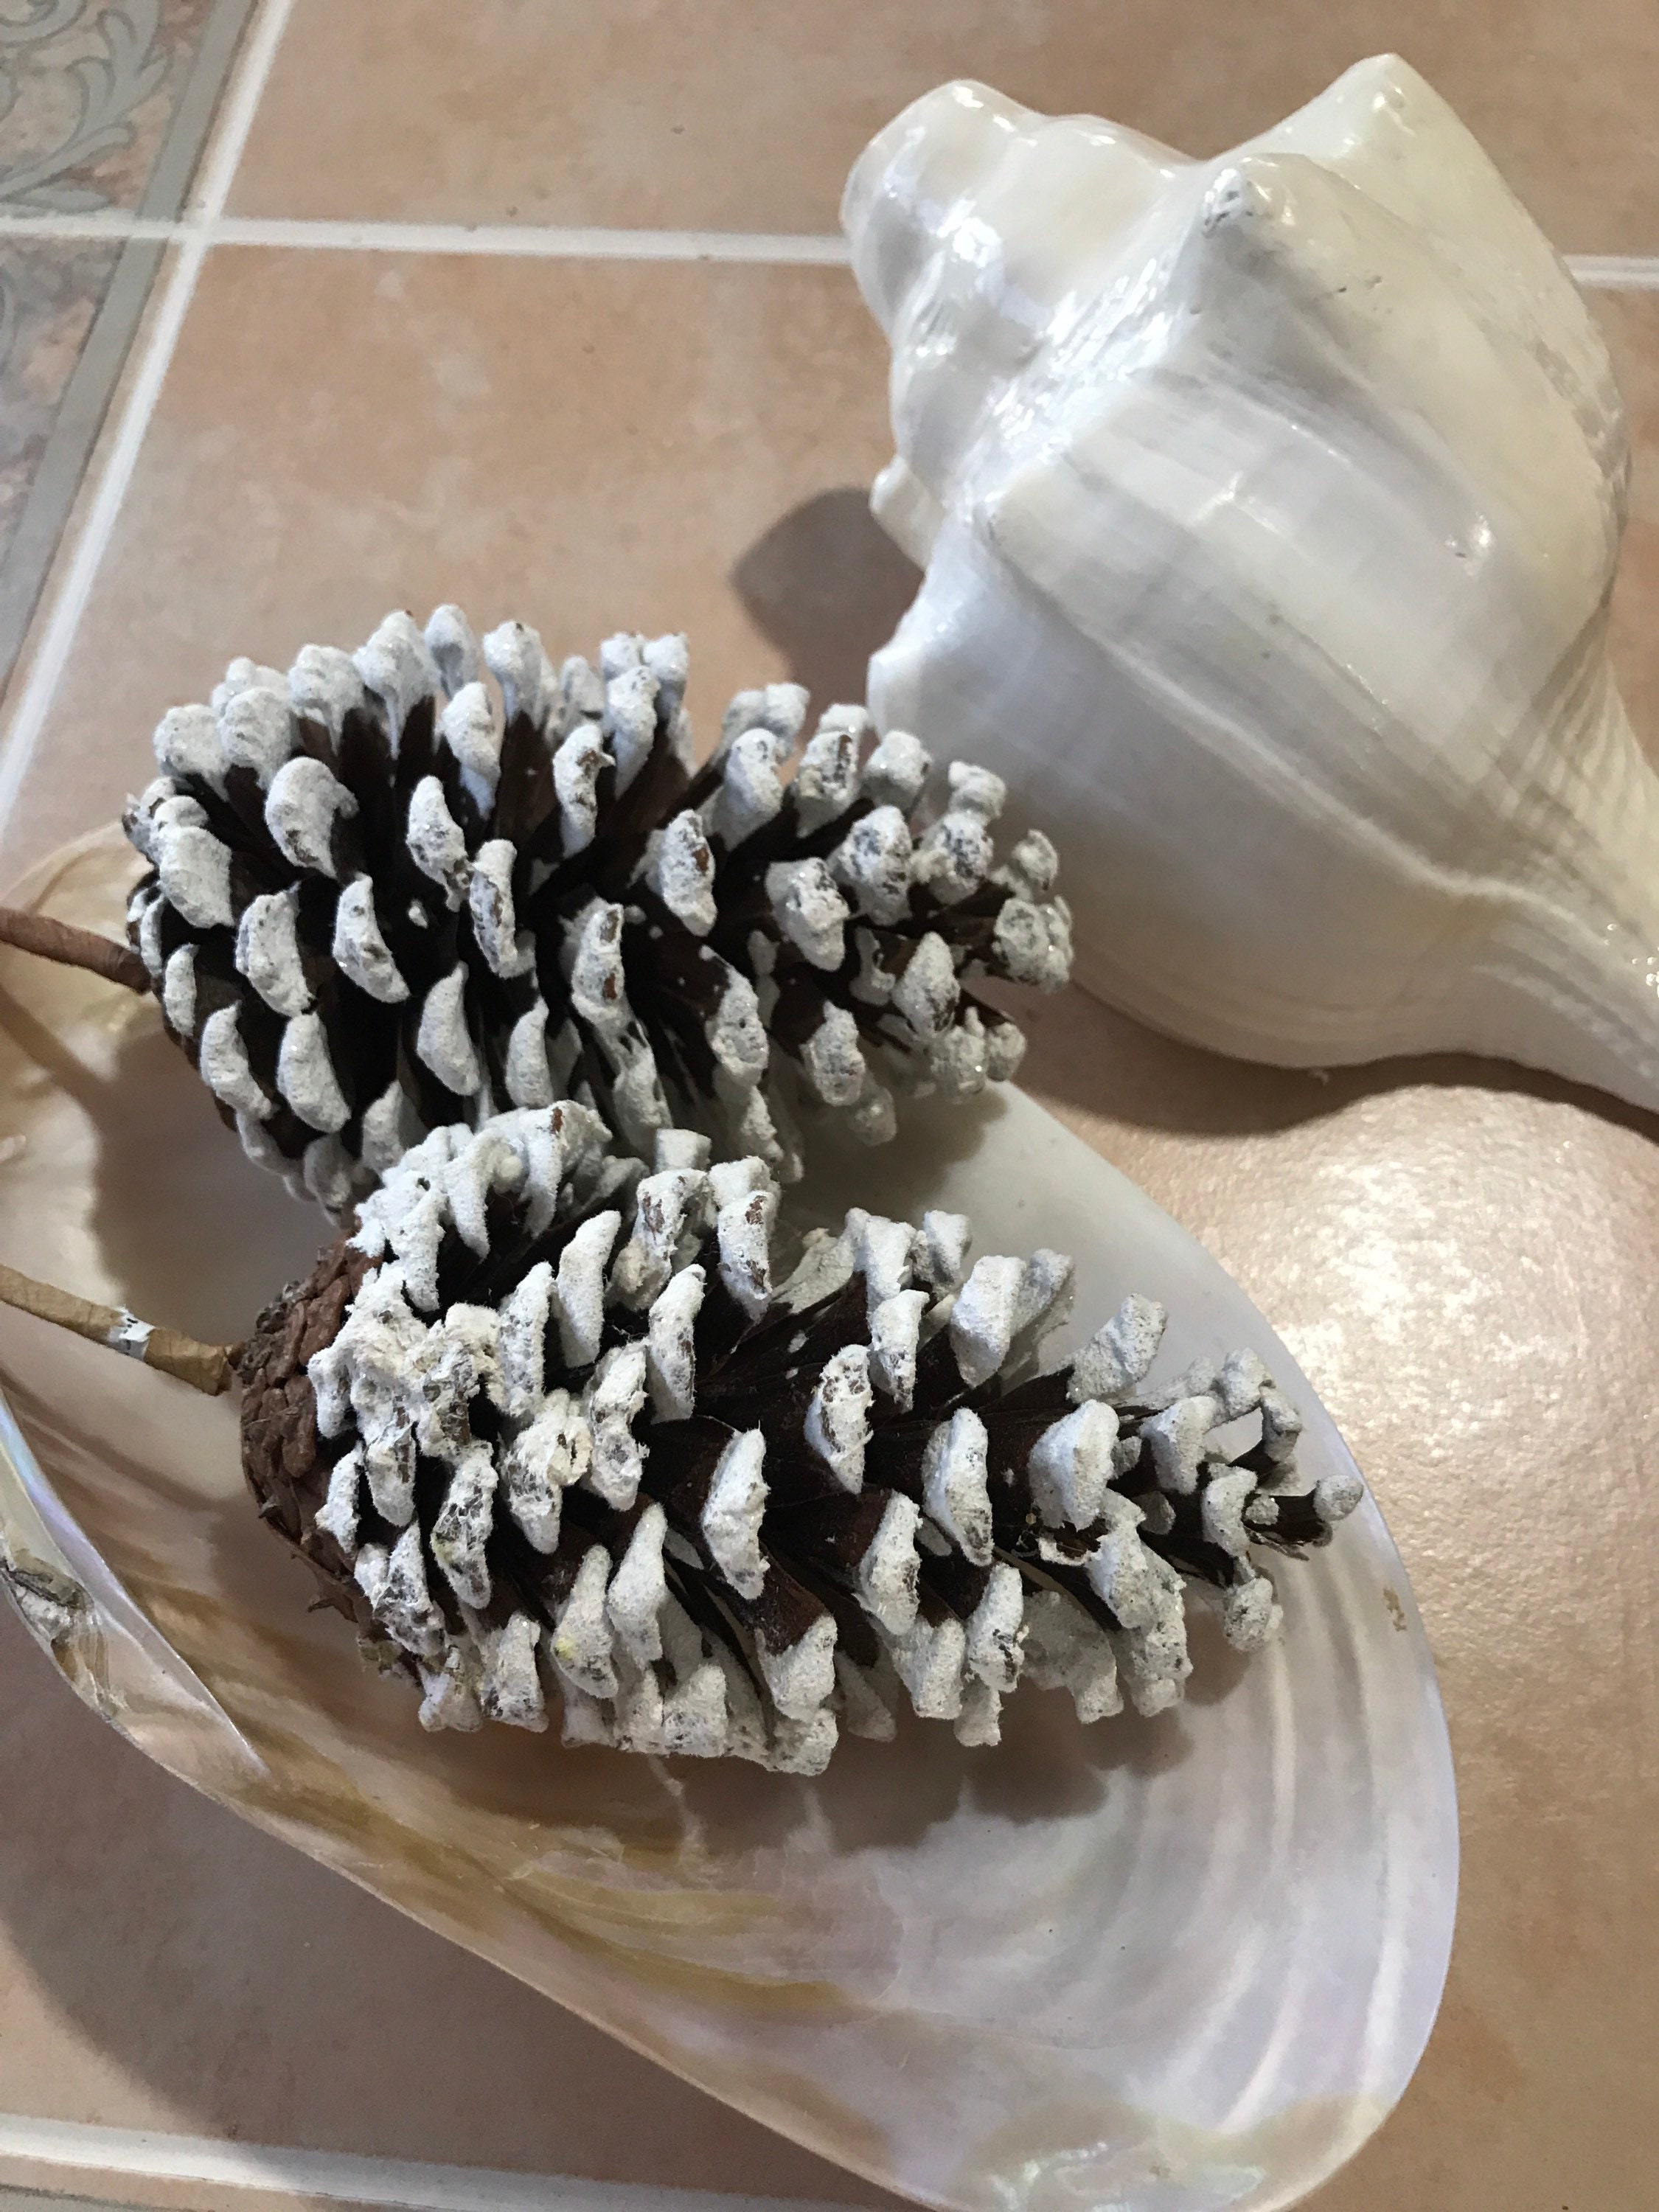 Extra Large White Tipped Pinecone Picks Measuring 11 in Long, for Your  Extravagant Holiday Wreaths, Garlands, Centerpieces and Other Crafts. 